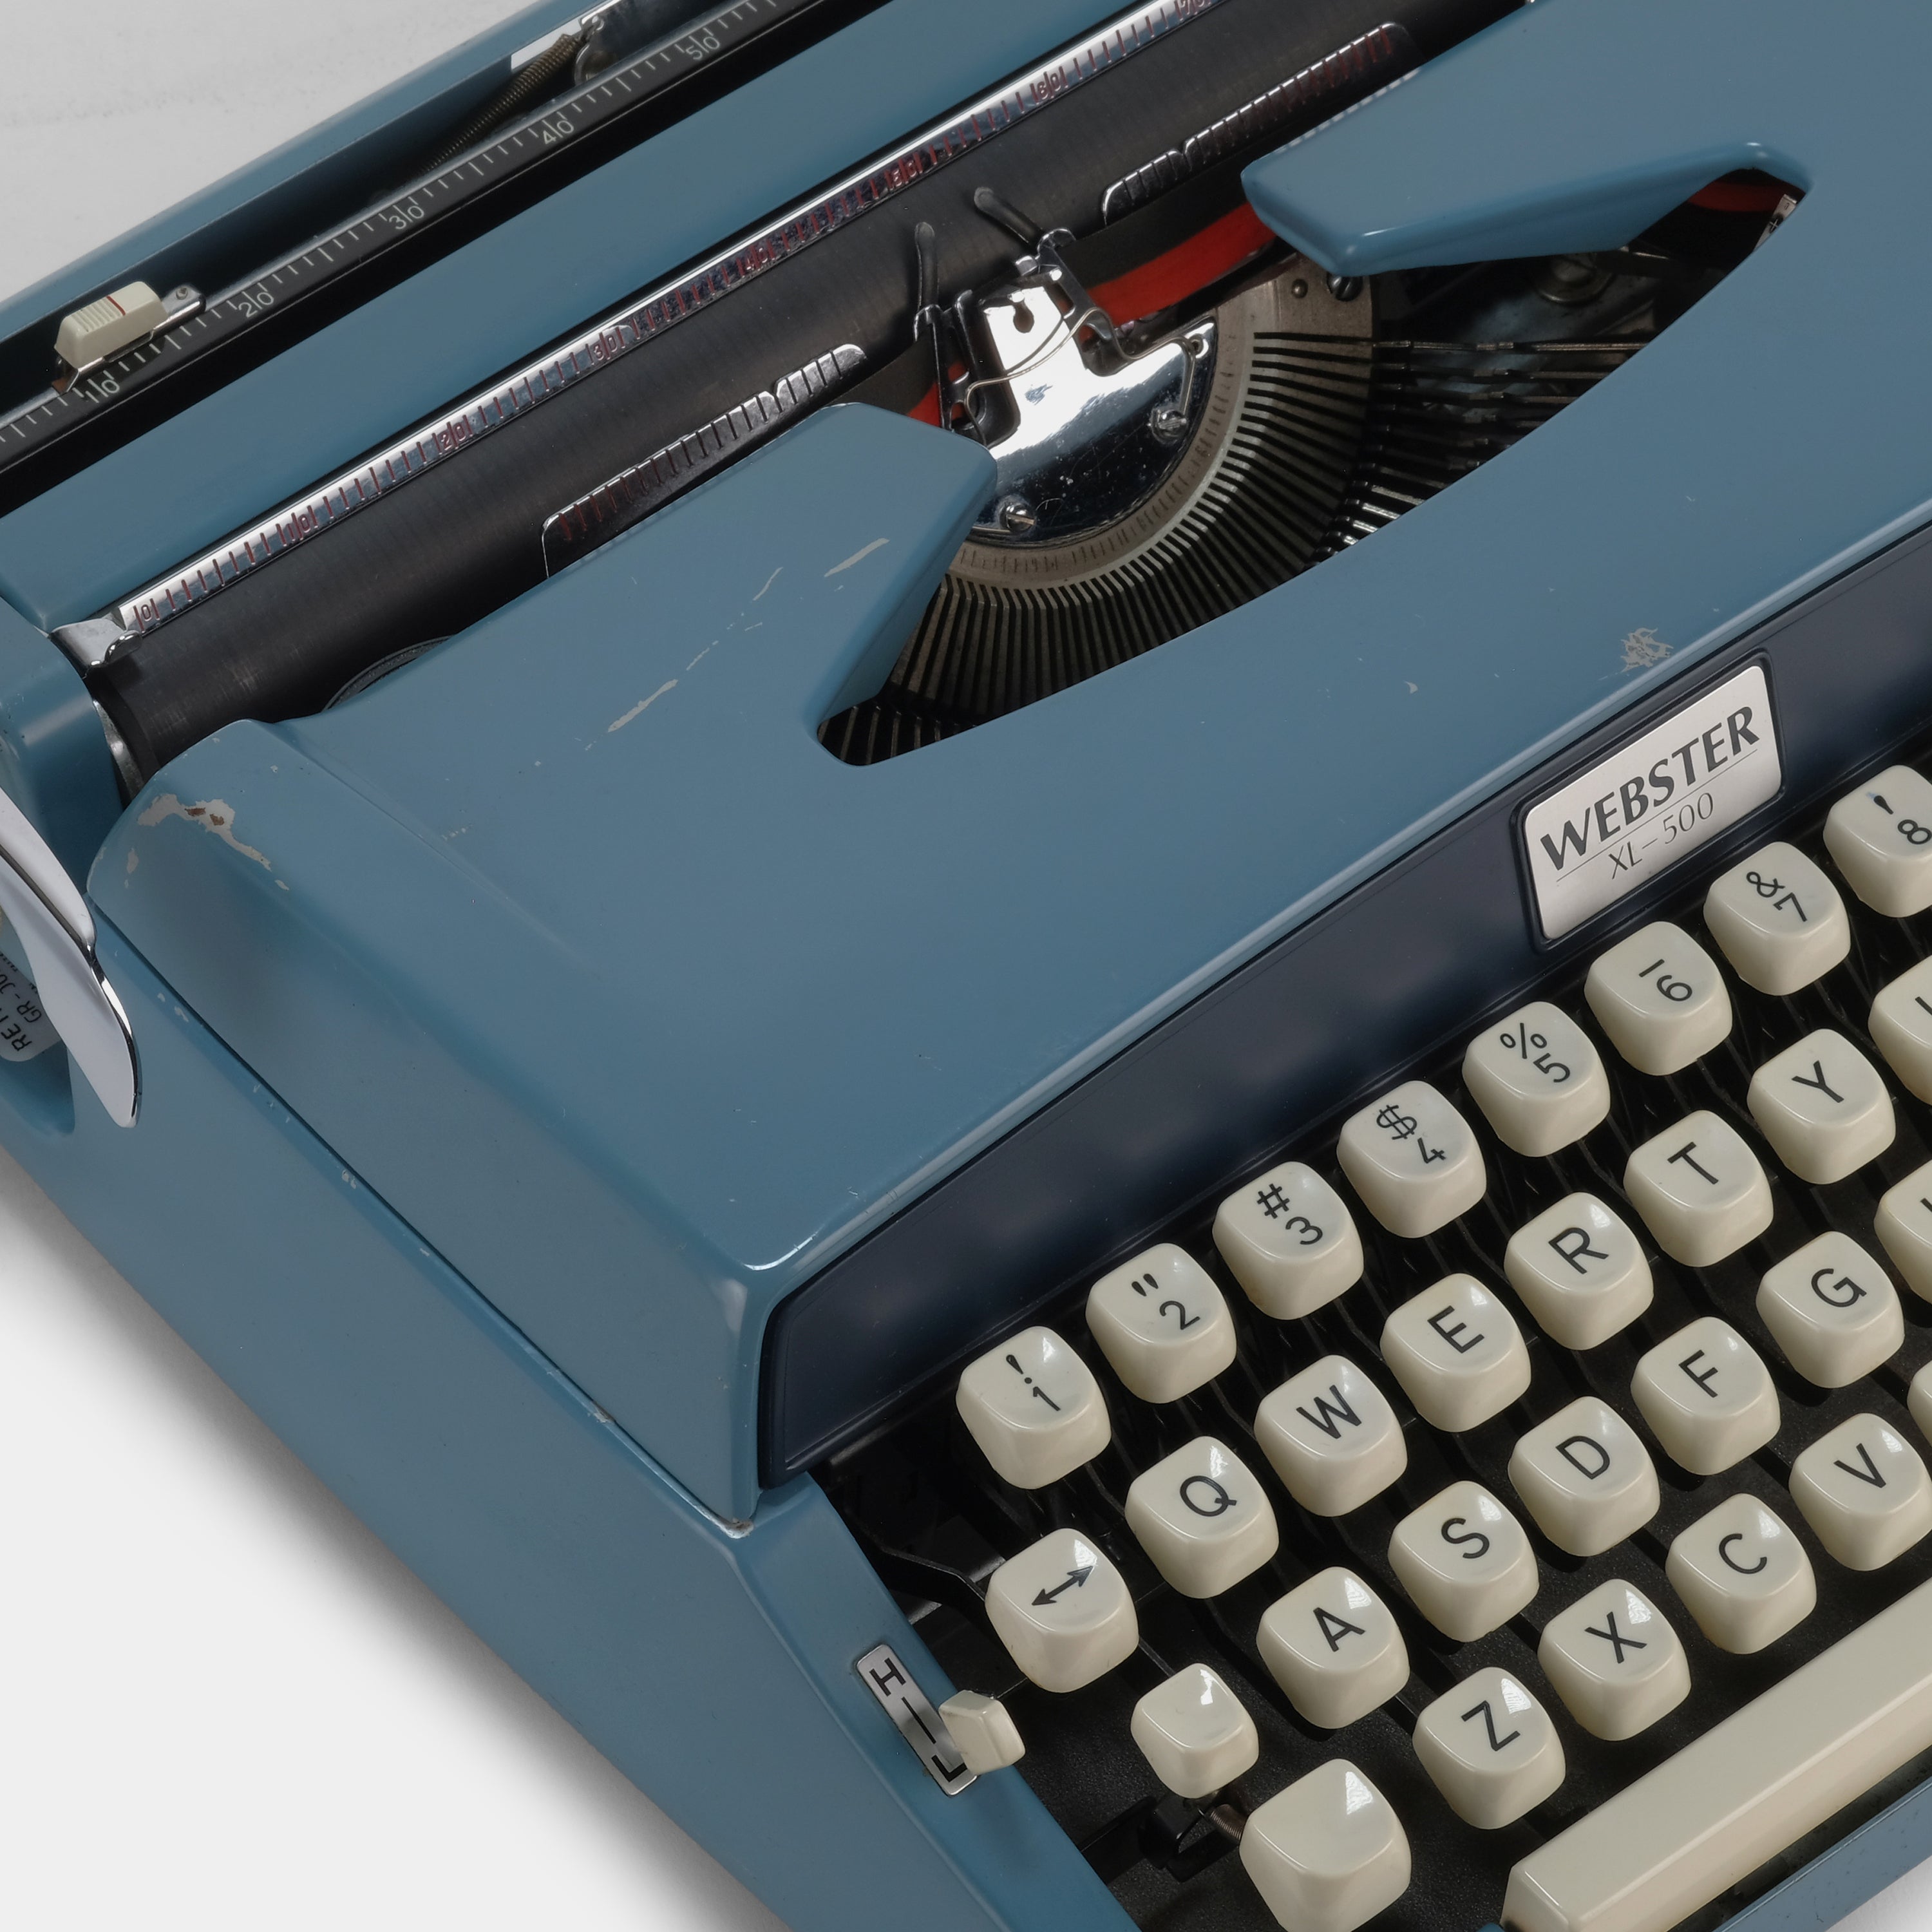 Webster XL-500 Blue Manual Typewriter and Case